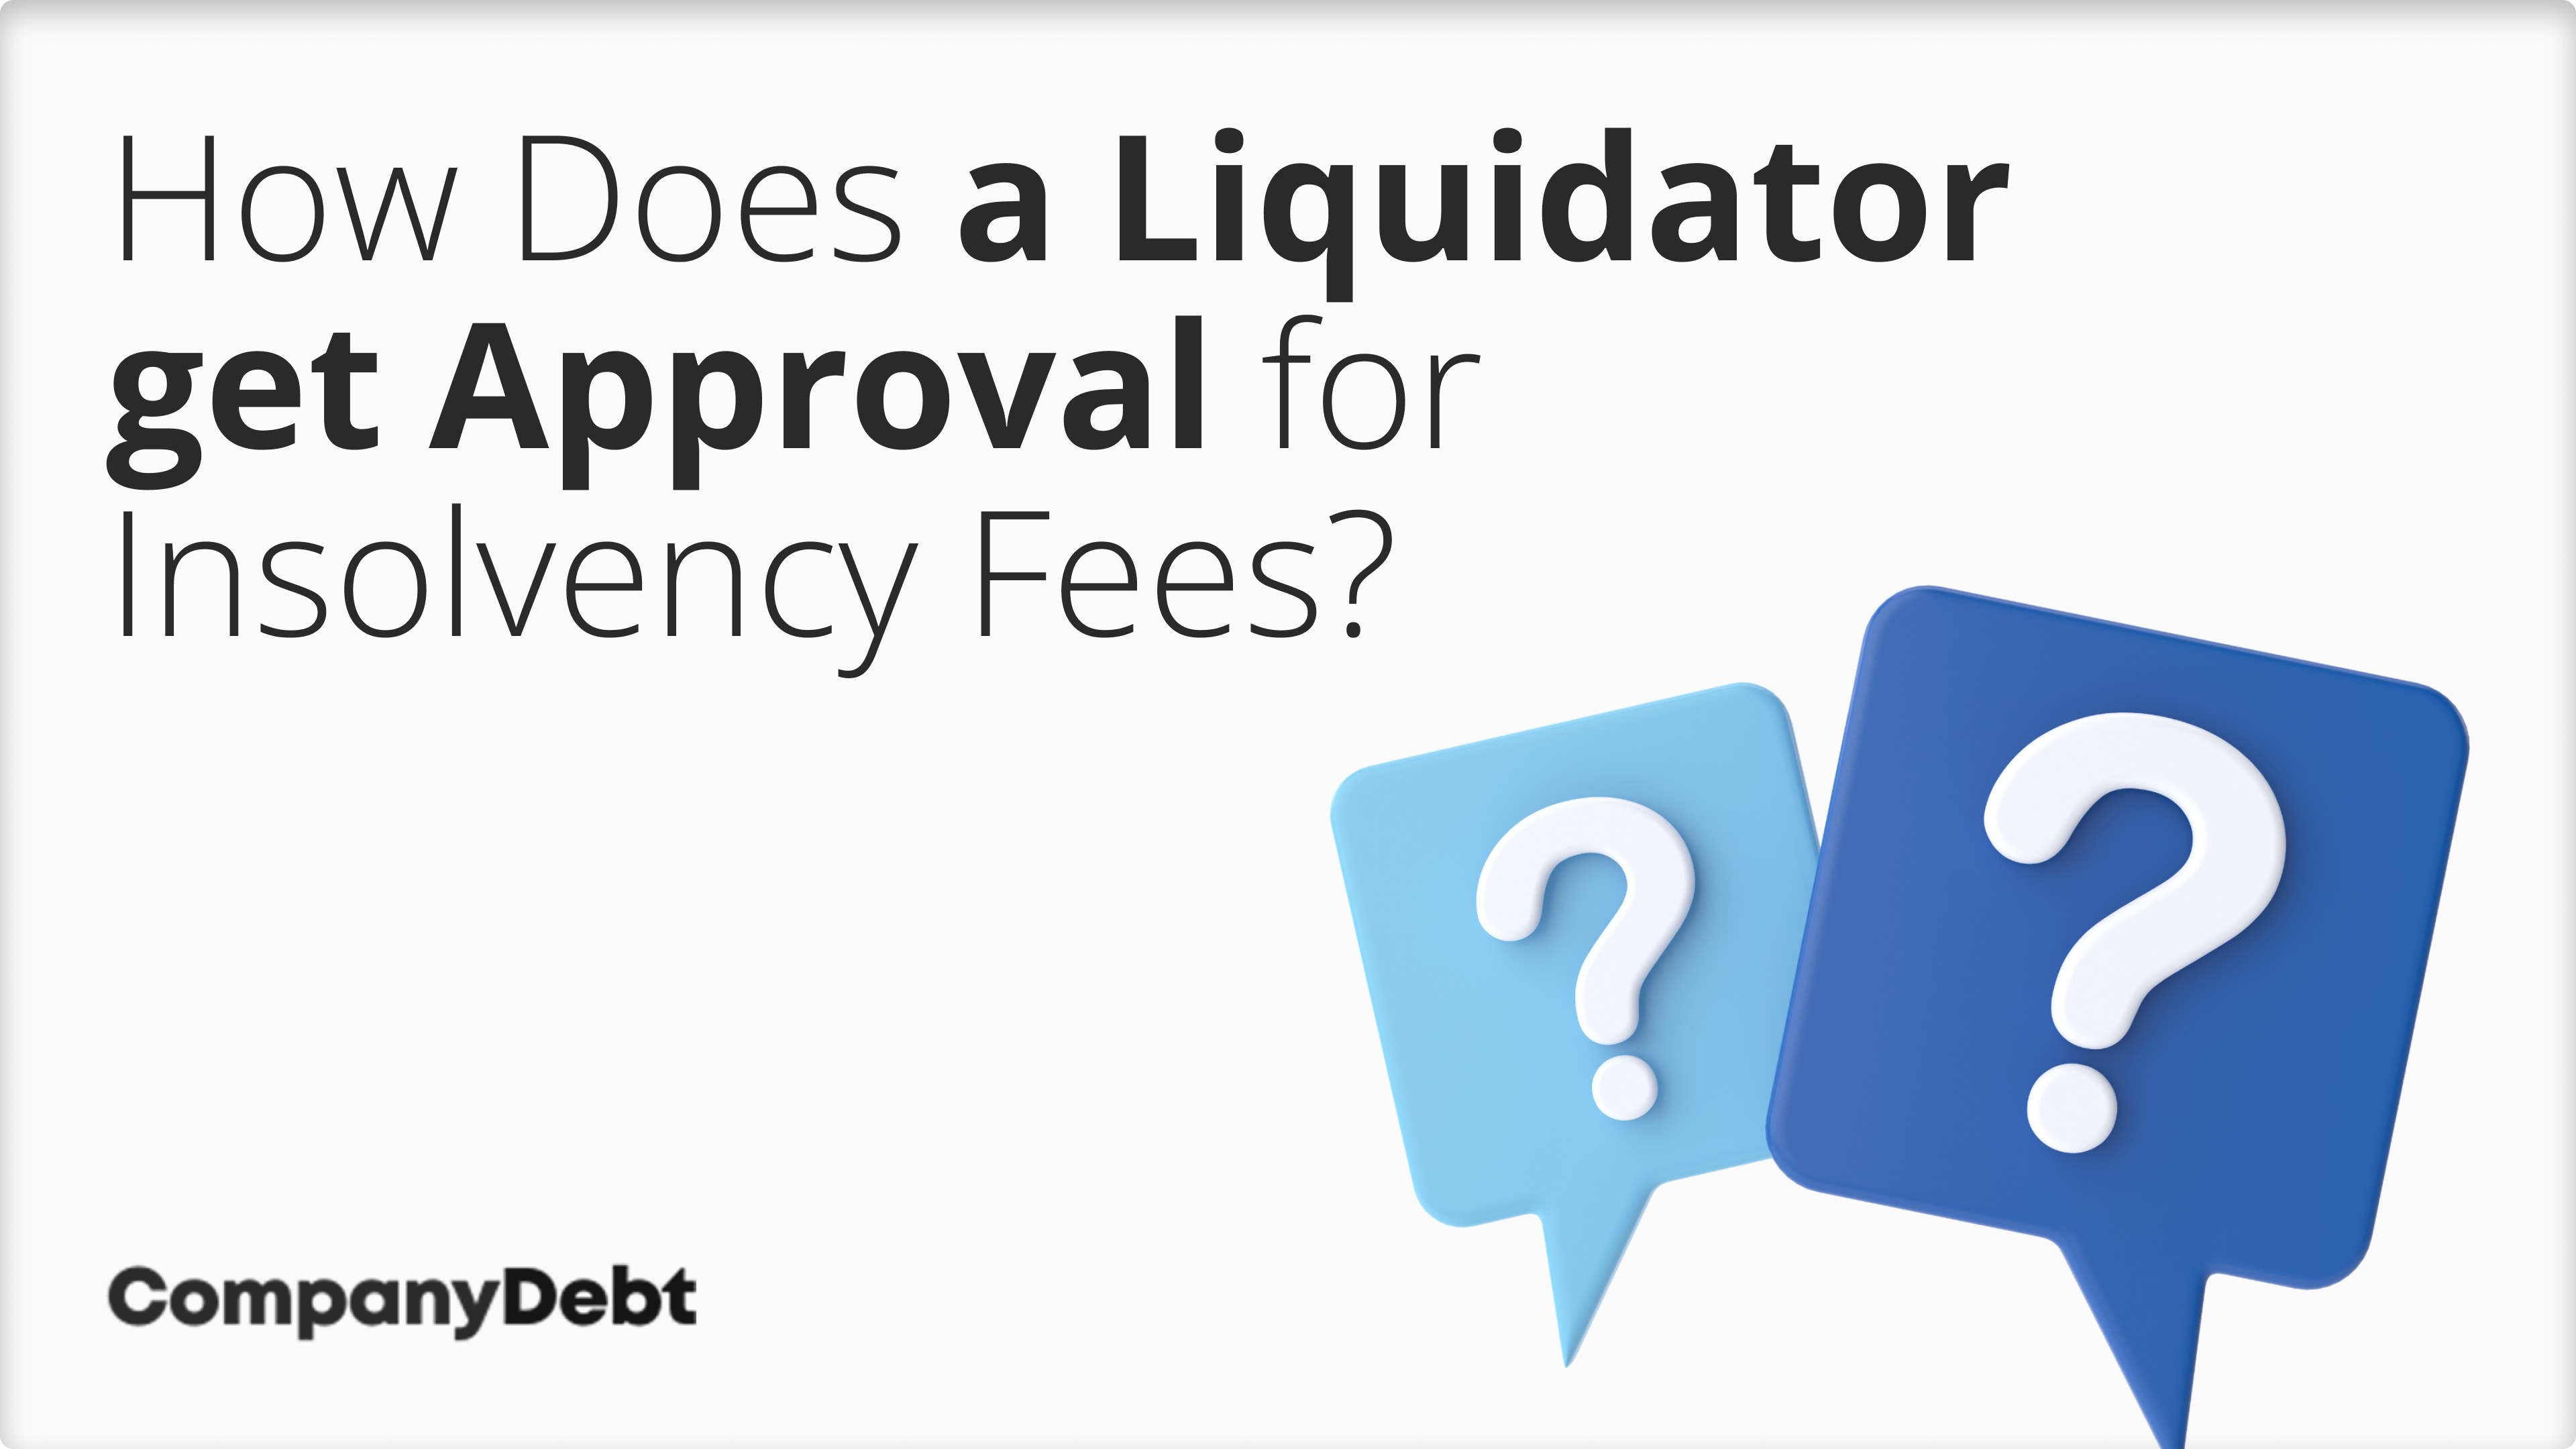 How-Does-a-Liquidator-get-Approval-for-Insolvency-Fees_